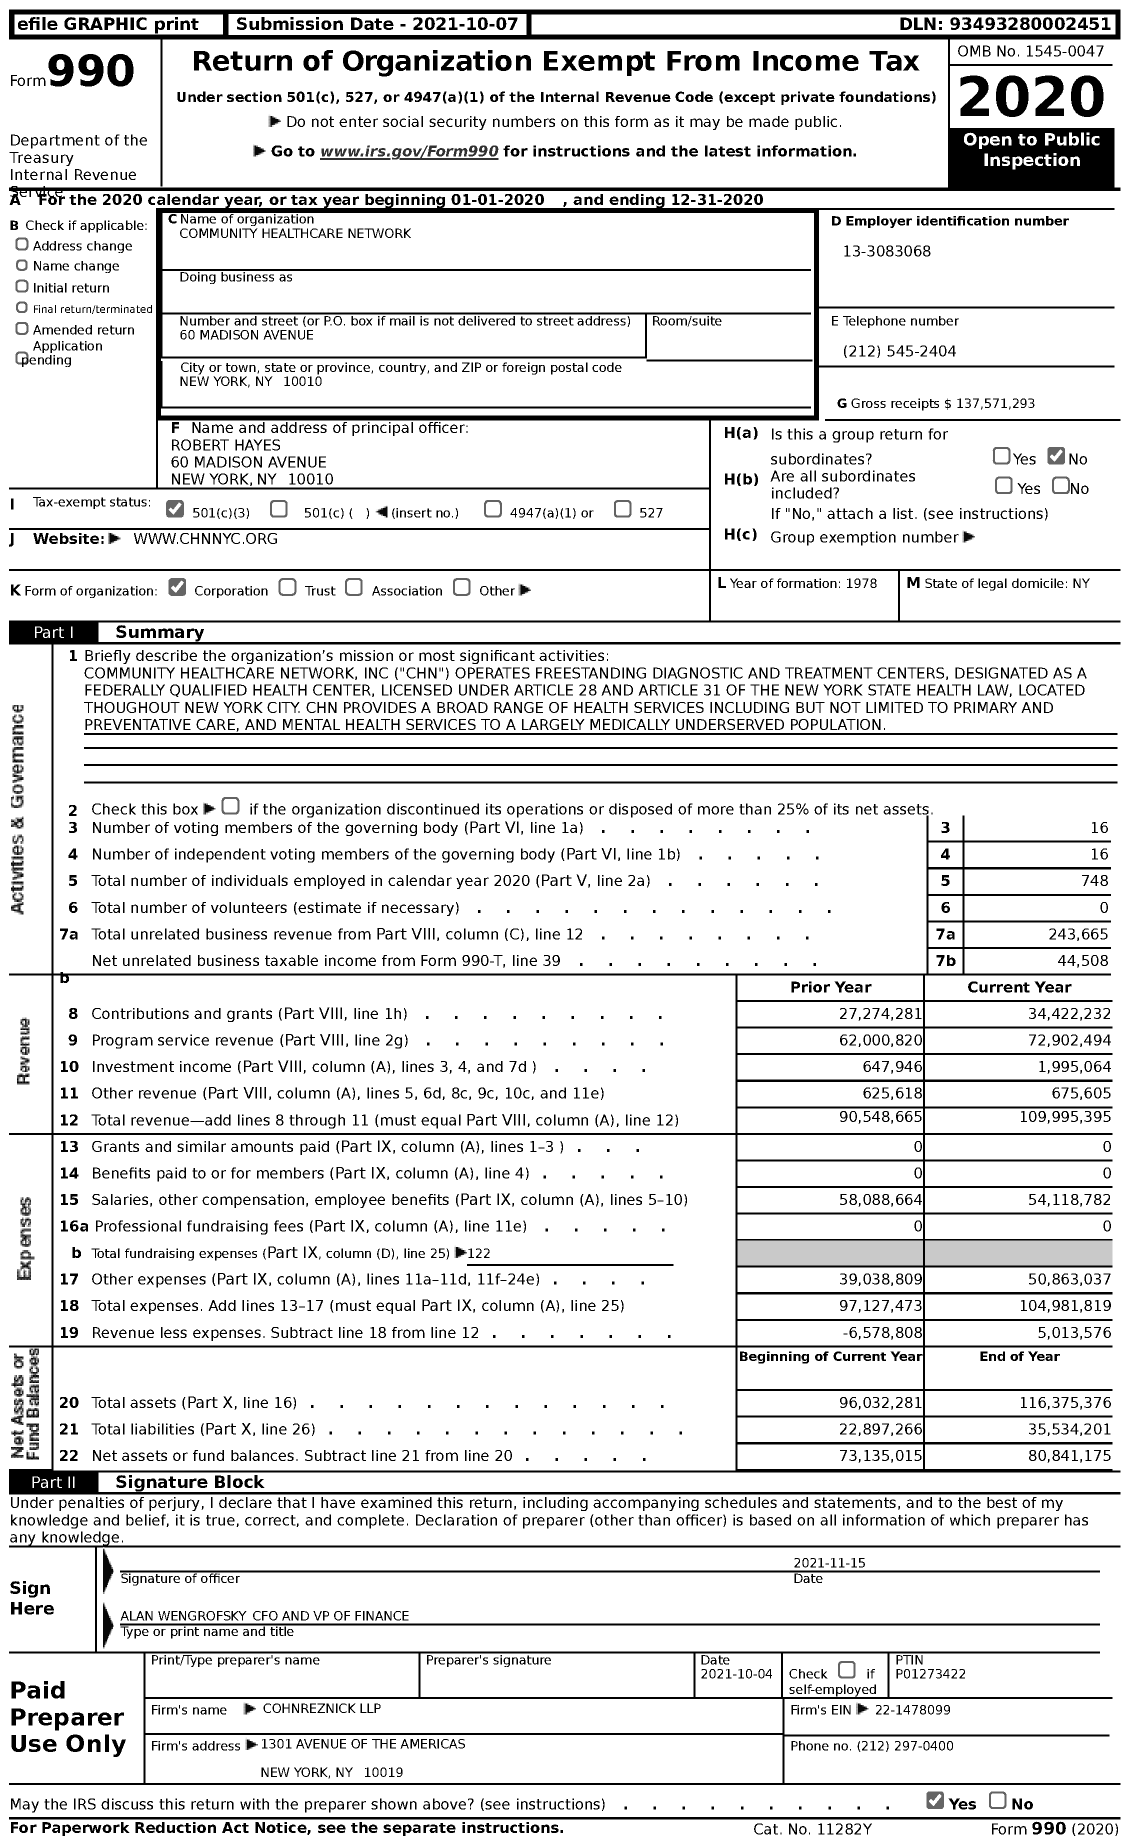 Image of first page of 2020 Form 990 for Community Healthcare Network (CHN)